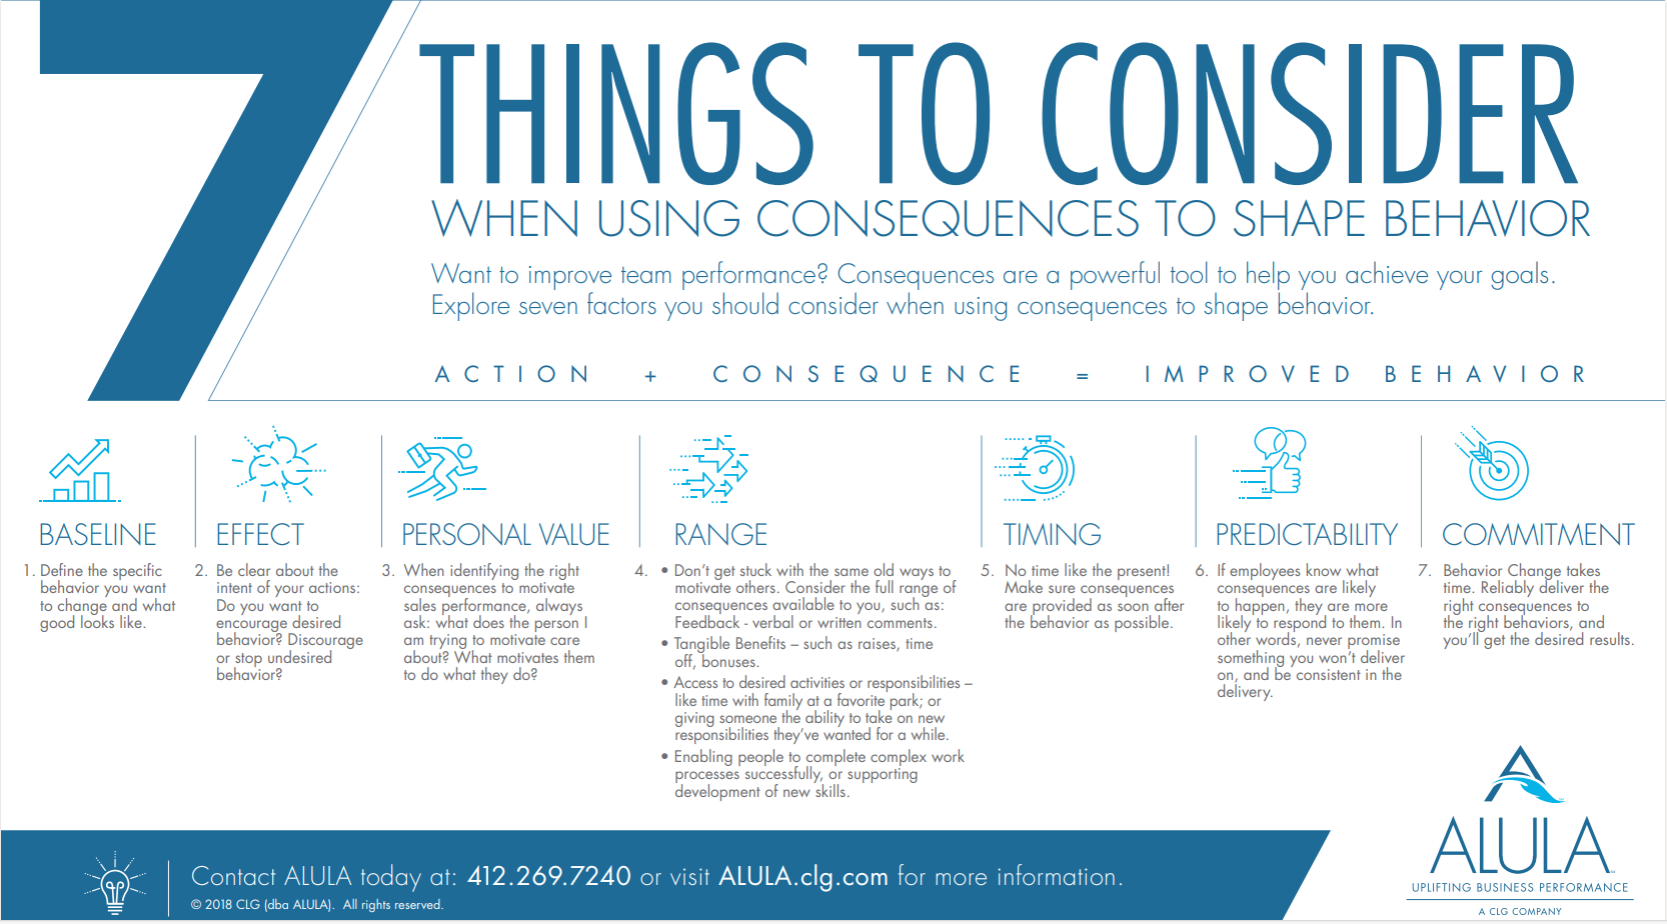 7 THINGS TO CONSIDER WHEN USING CONSEQUENCES TO SHAPE BEHAVIOR image